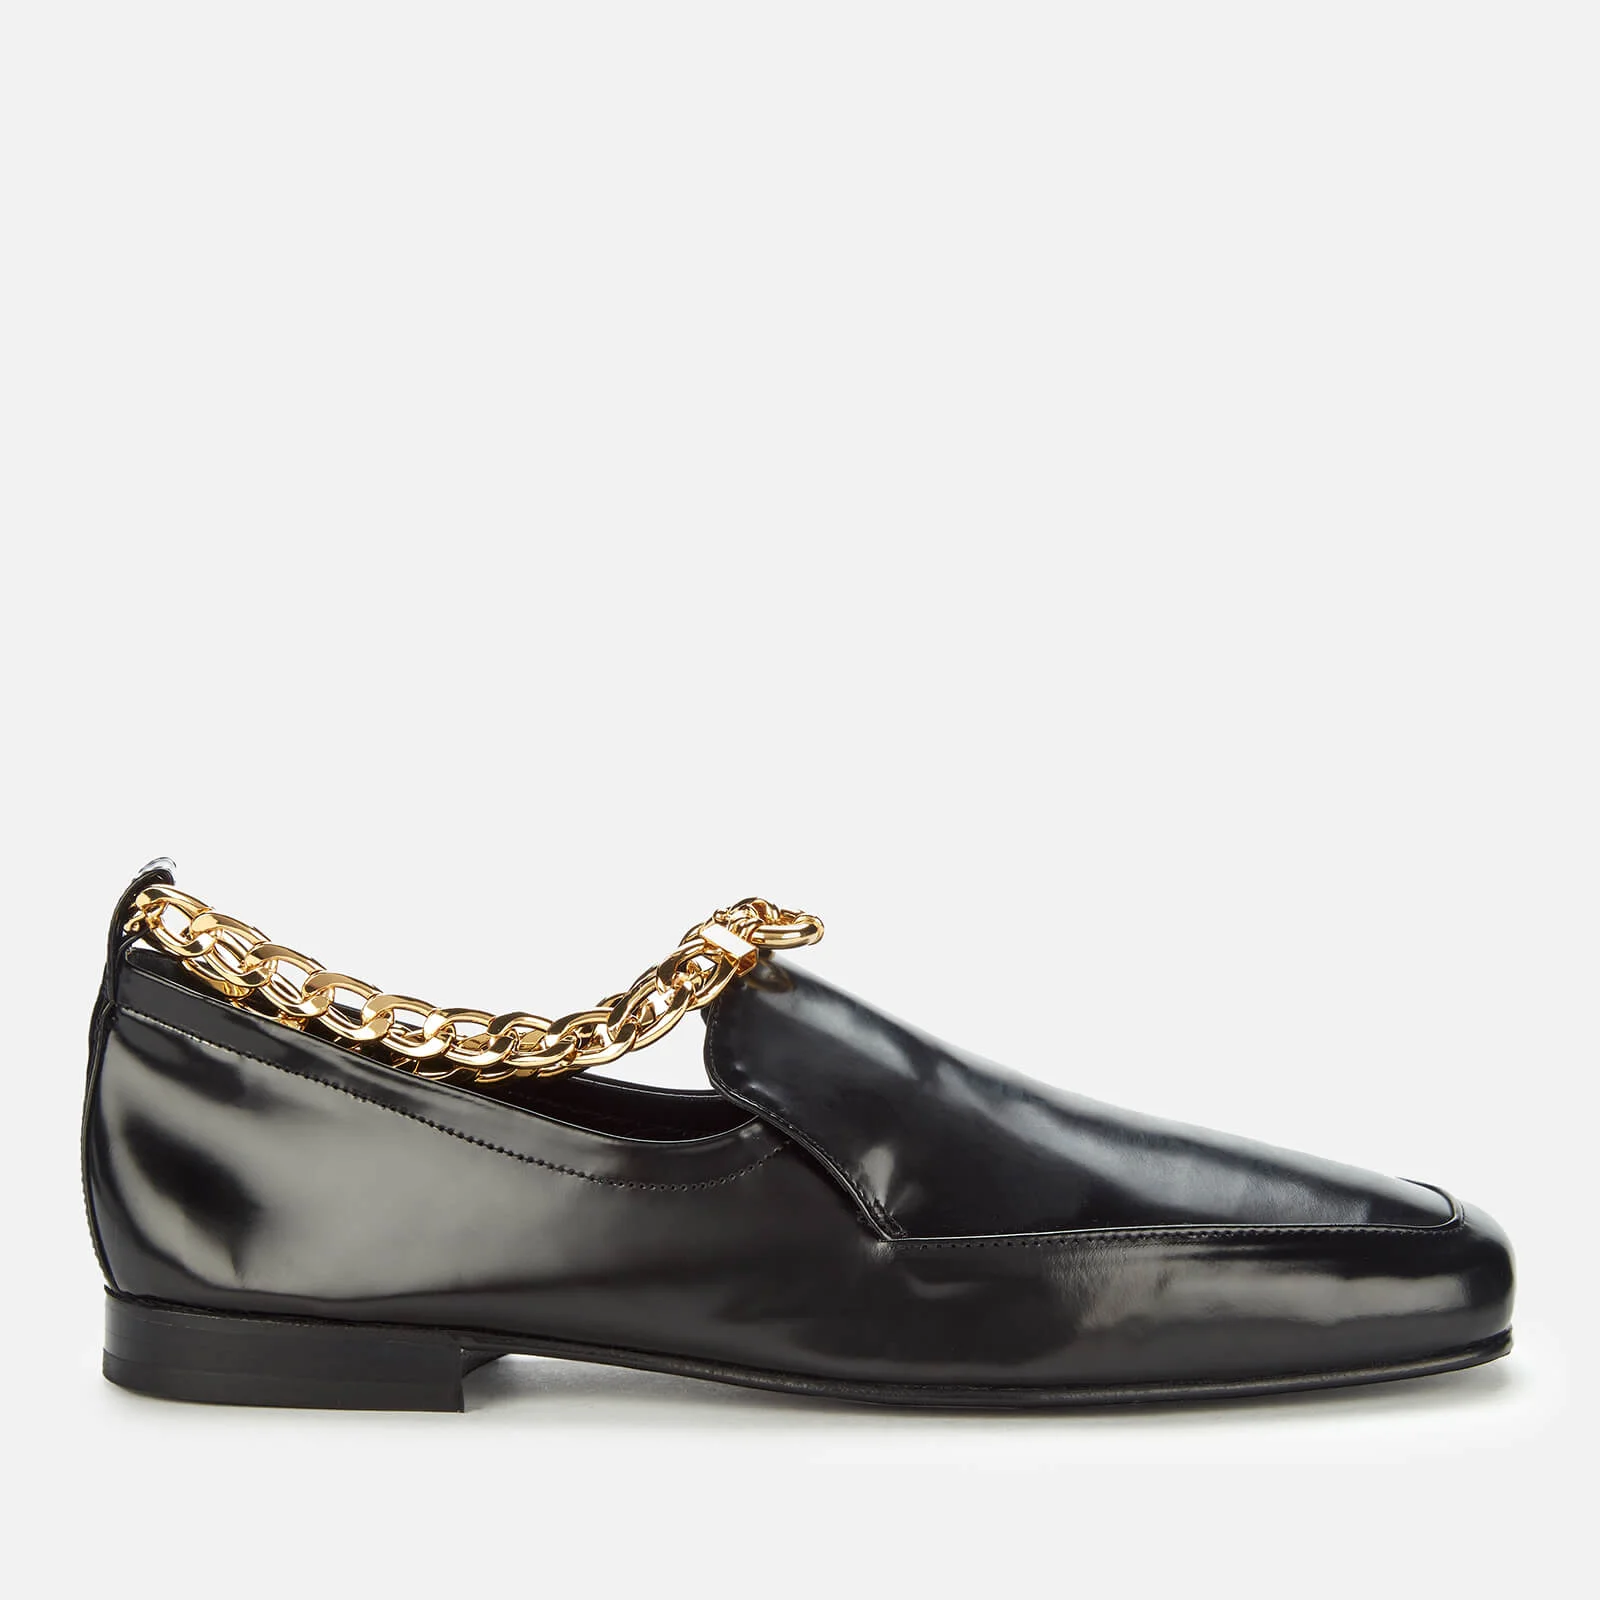 BY FAR Women's Nick Semi Patent Leather Loafers - Black Image 1